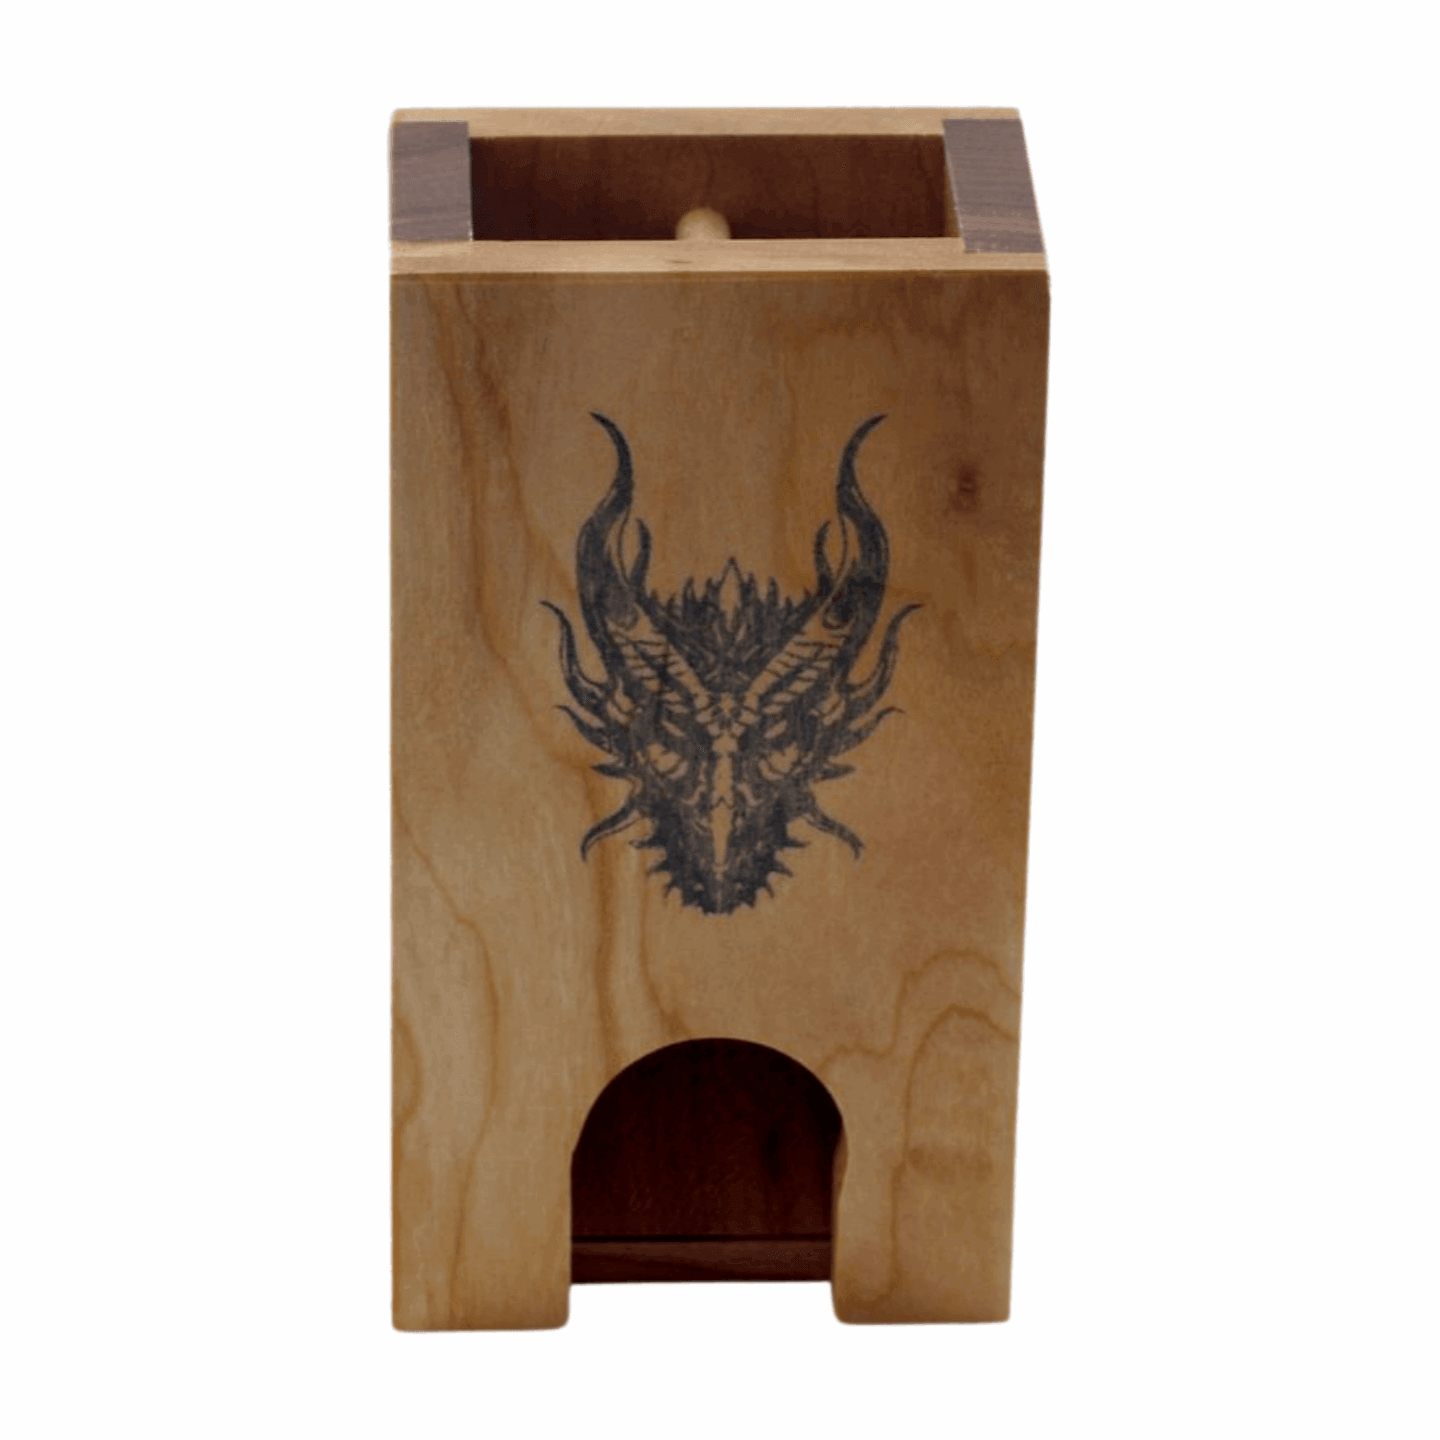 Small Cherry and Walnut Dice Tower with Dragon - Dragon Armor Games